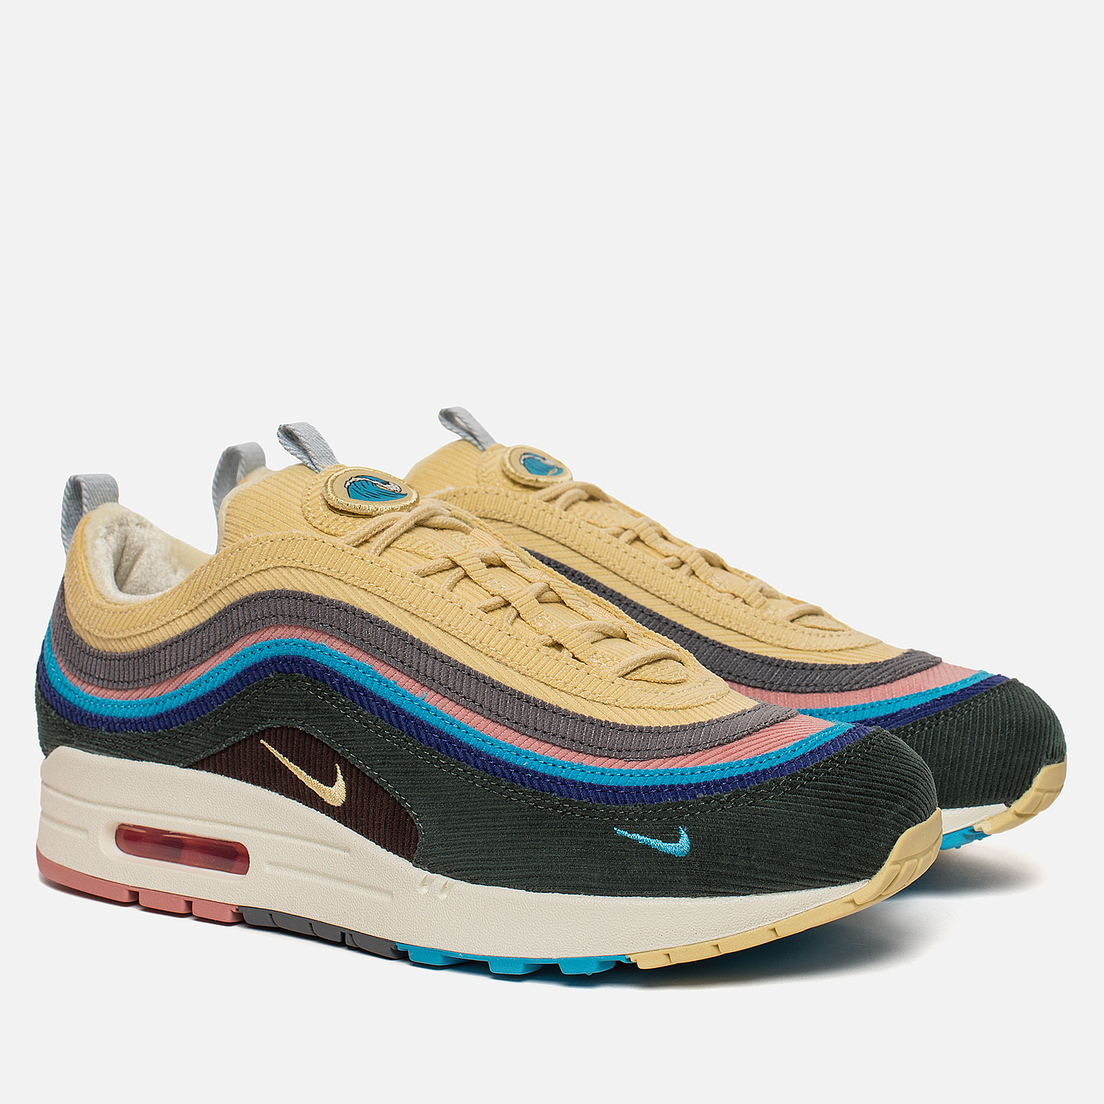 nike 97 wotherspoon